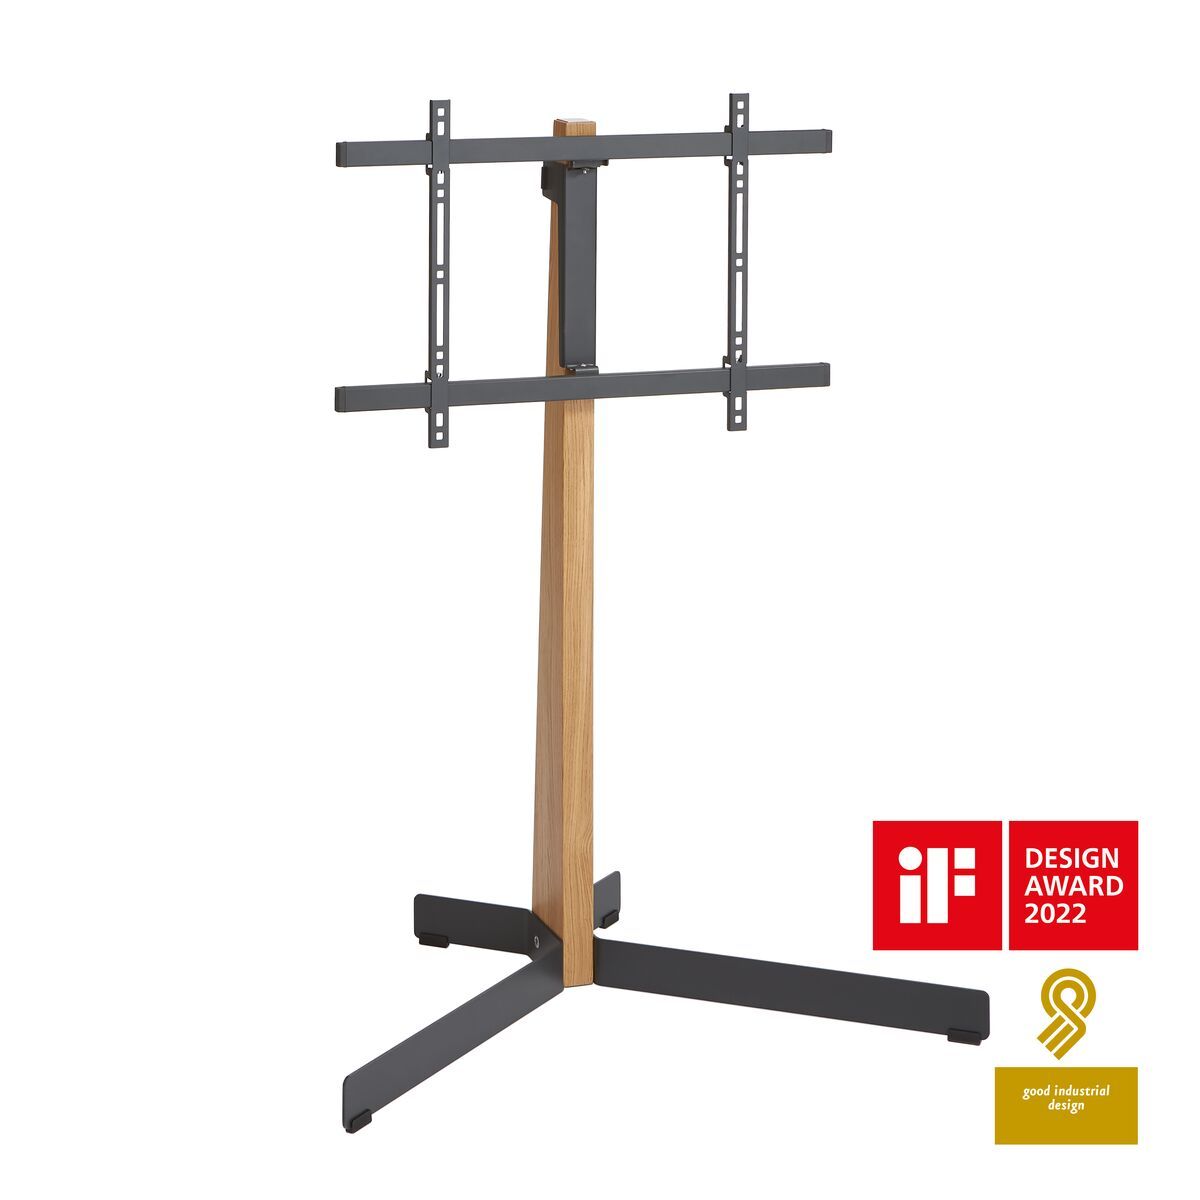 Vogel's TVS 3695 TV Floor Stand (black) - Suitable for 40 up to 77 inch TVs up to 50 kg - Promo